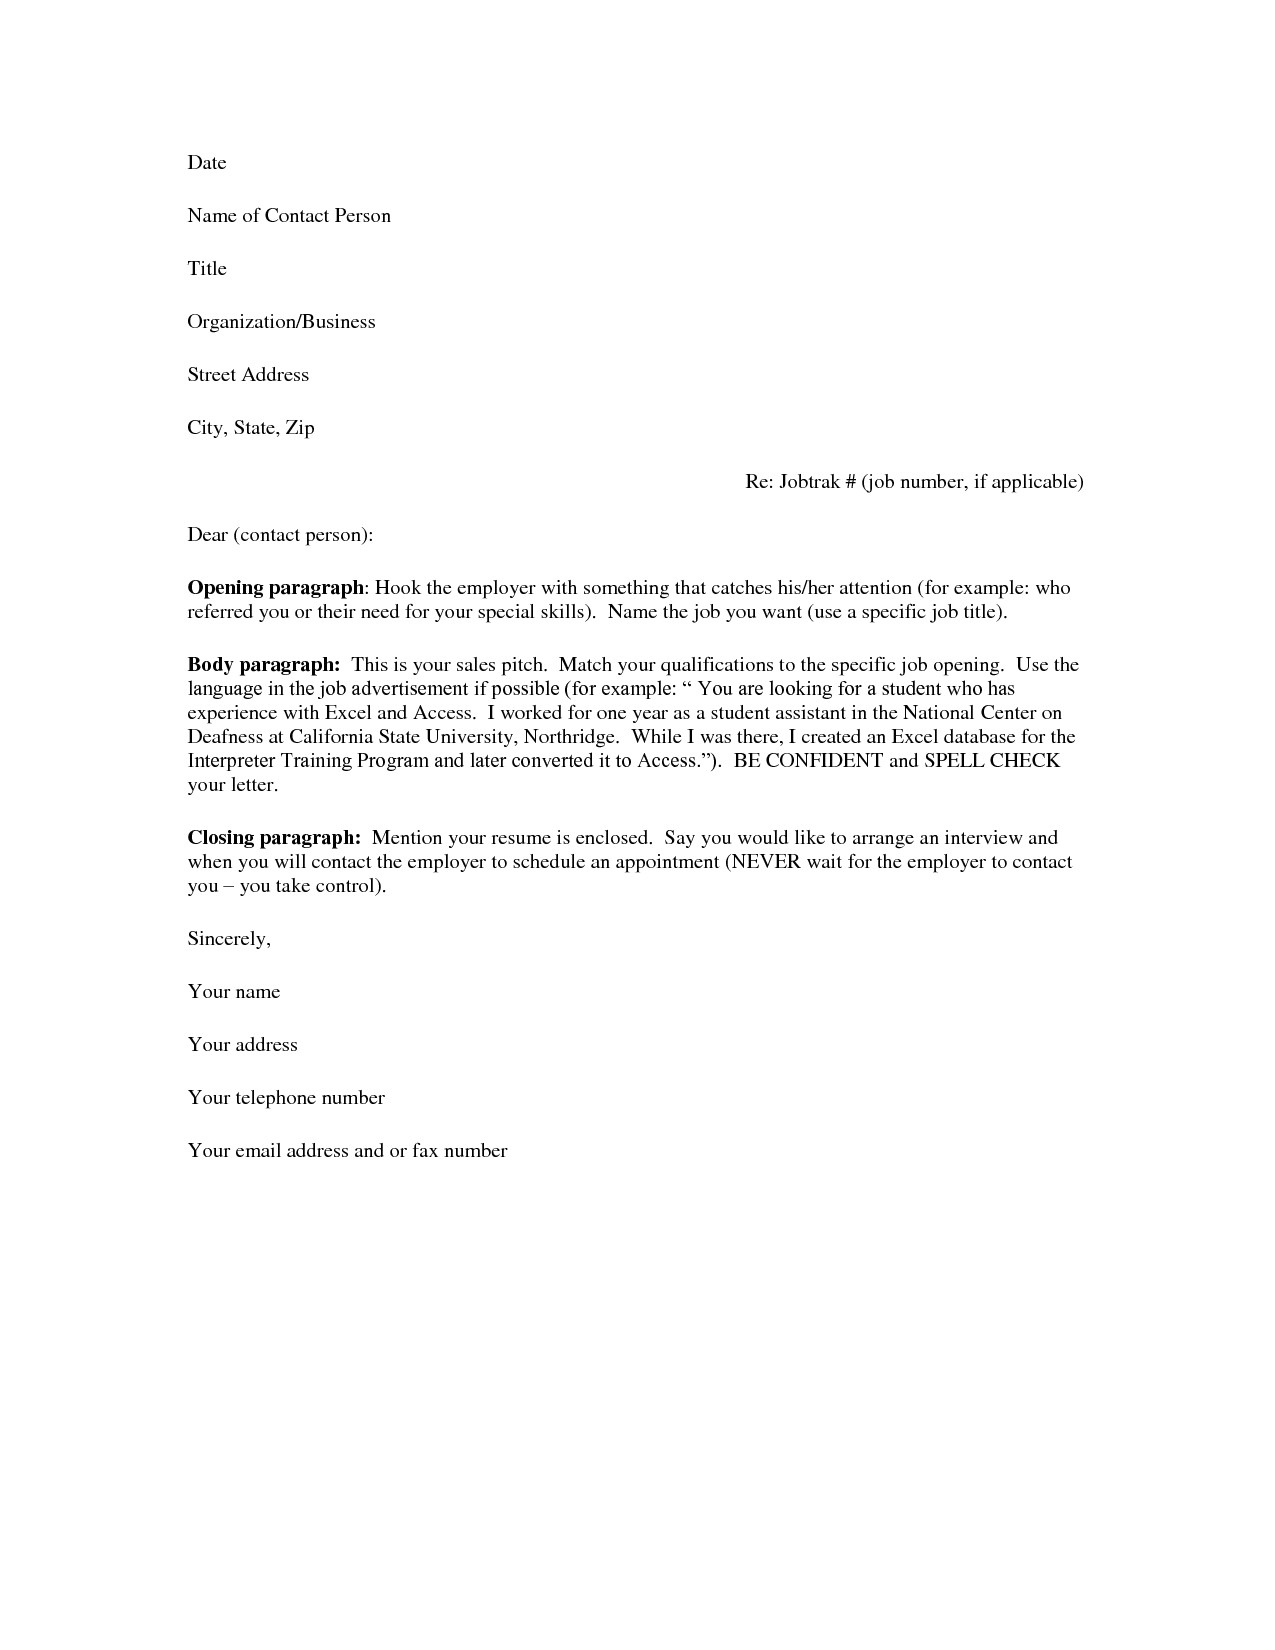 examples of cover letter for resume template